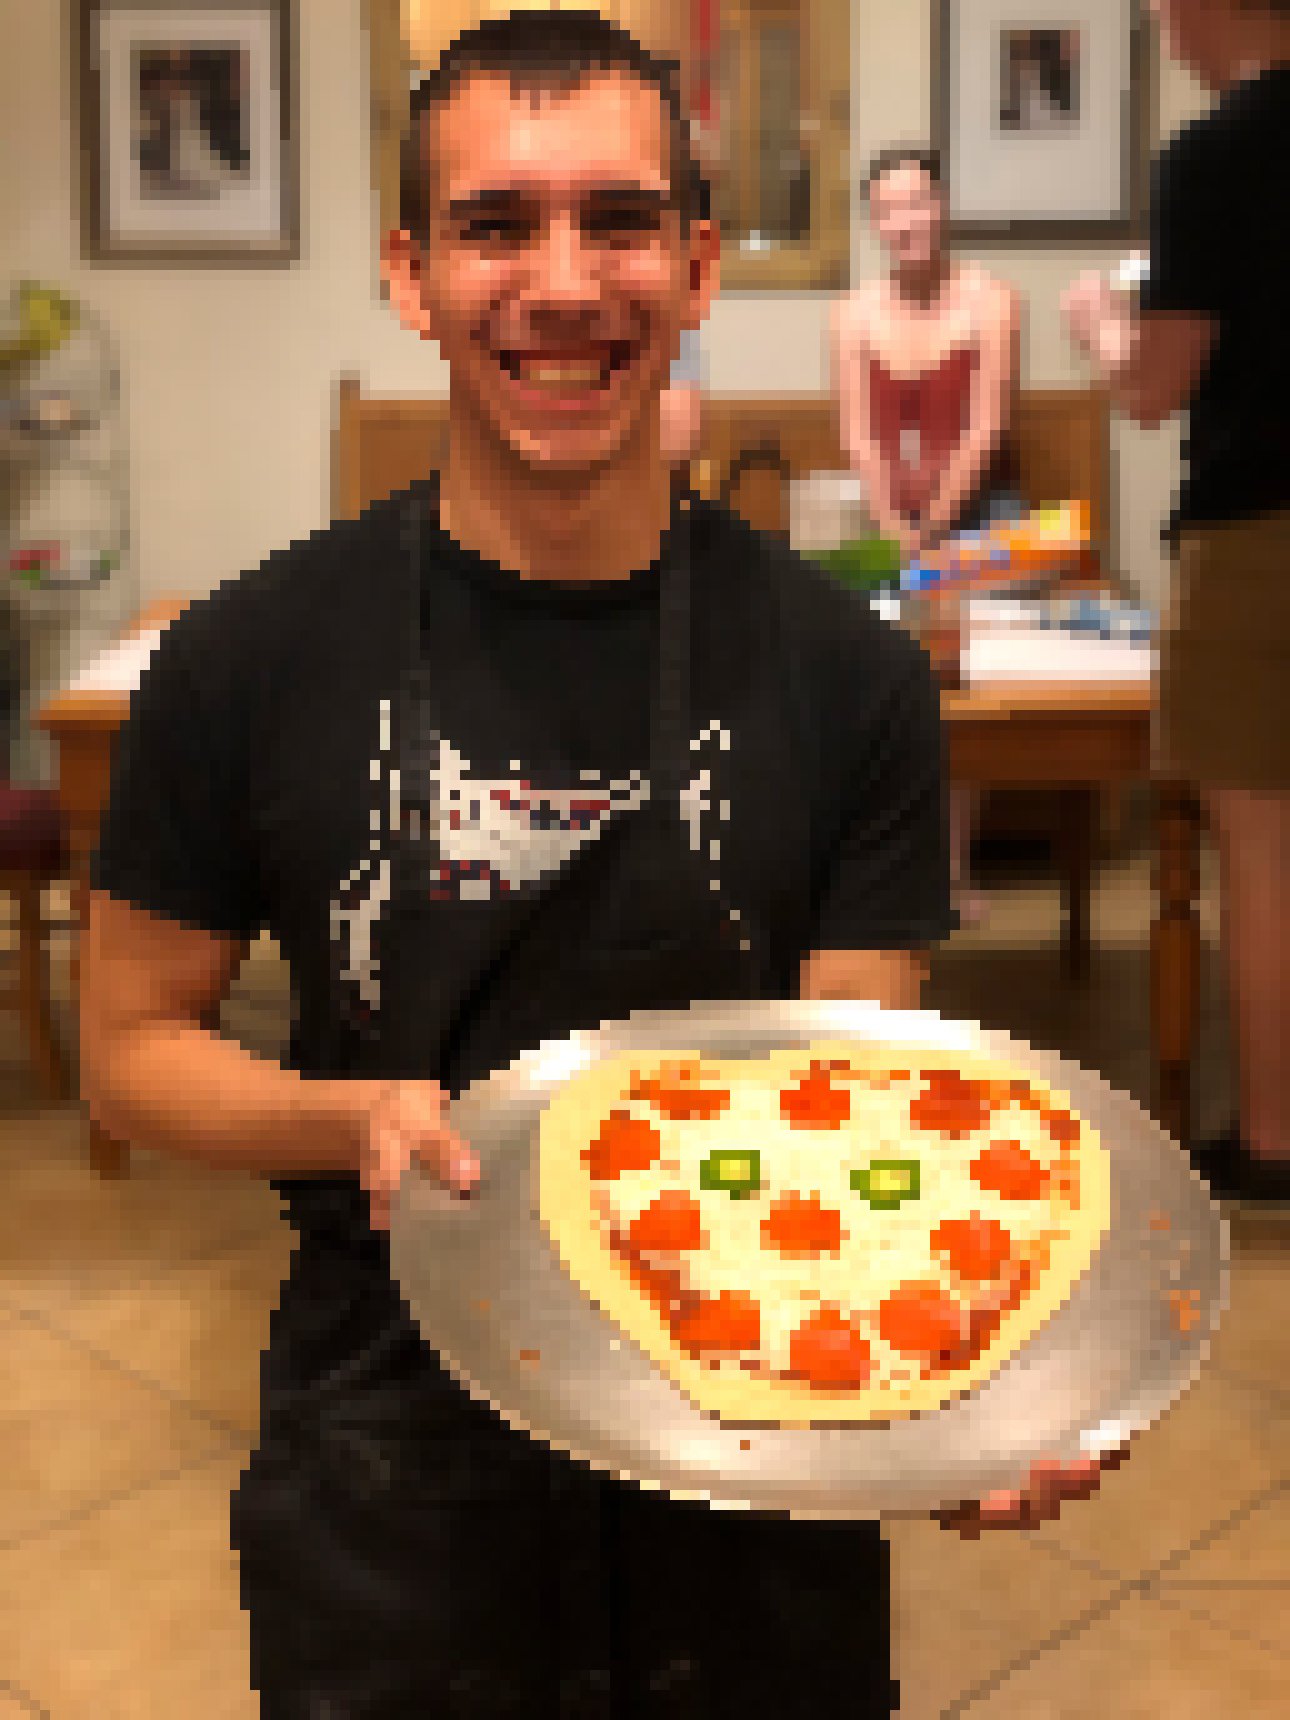 Jose with a pizza